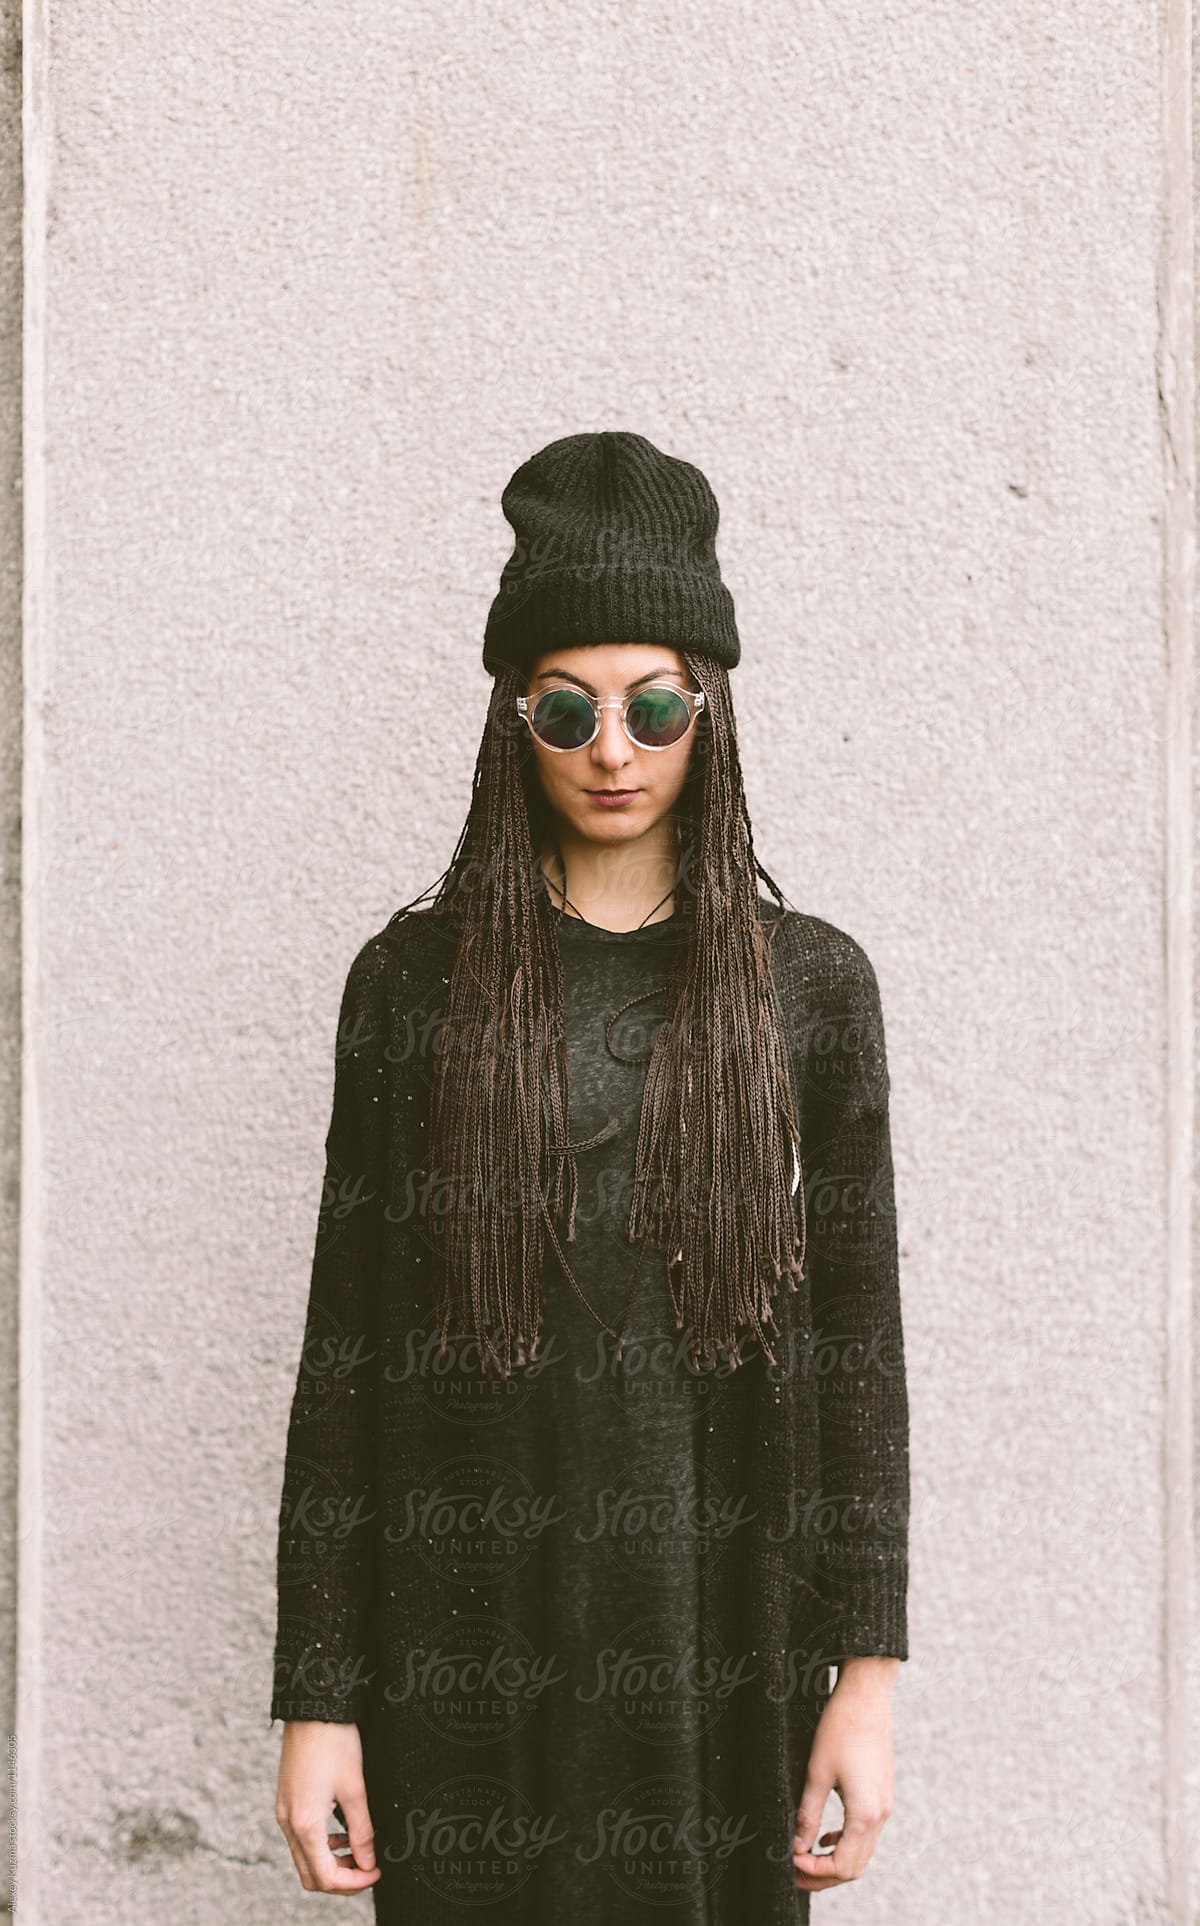 young woman wearing a black wool hat and round sunglasess